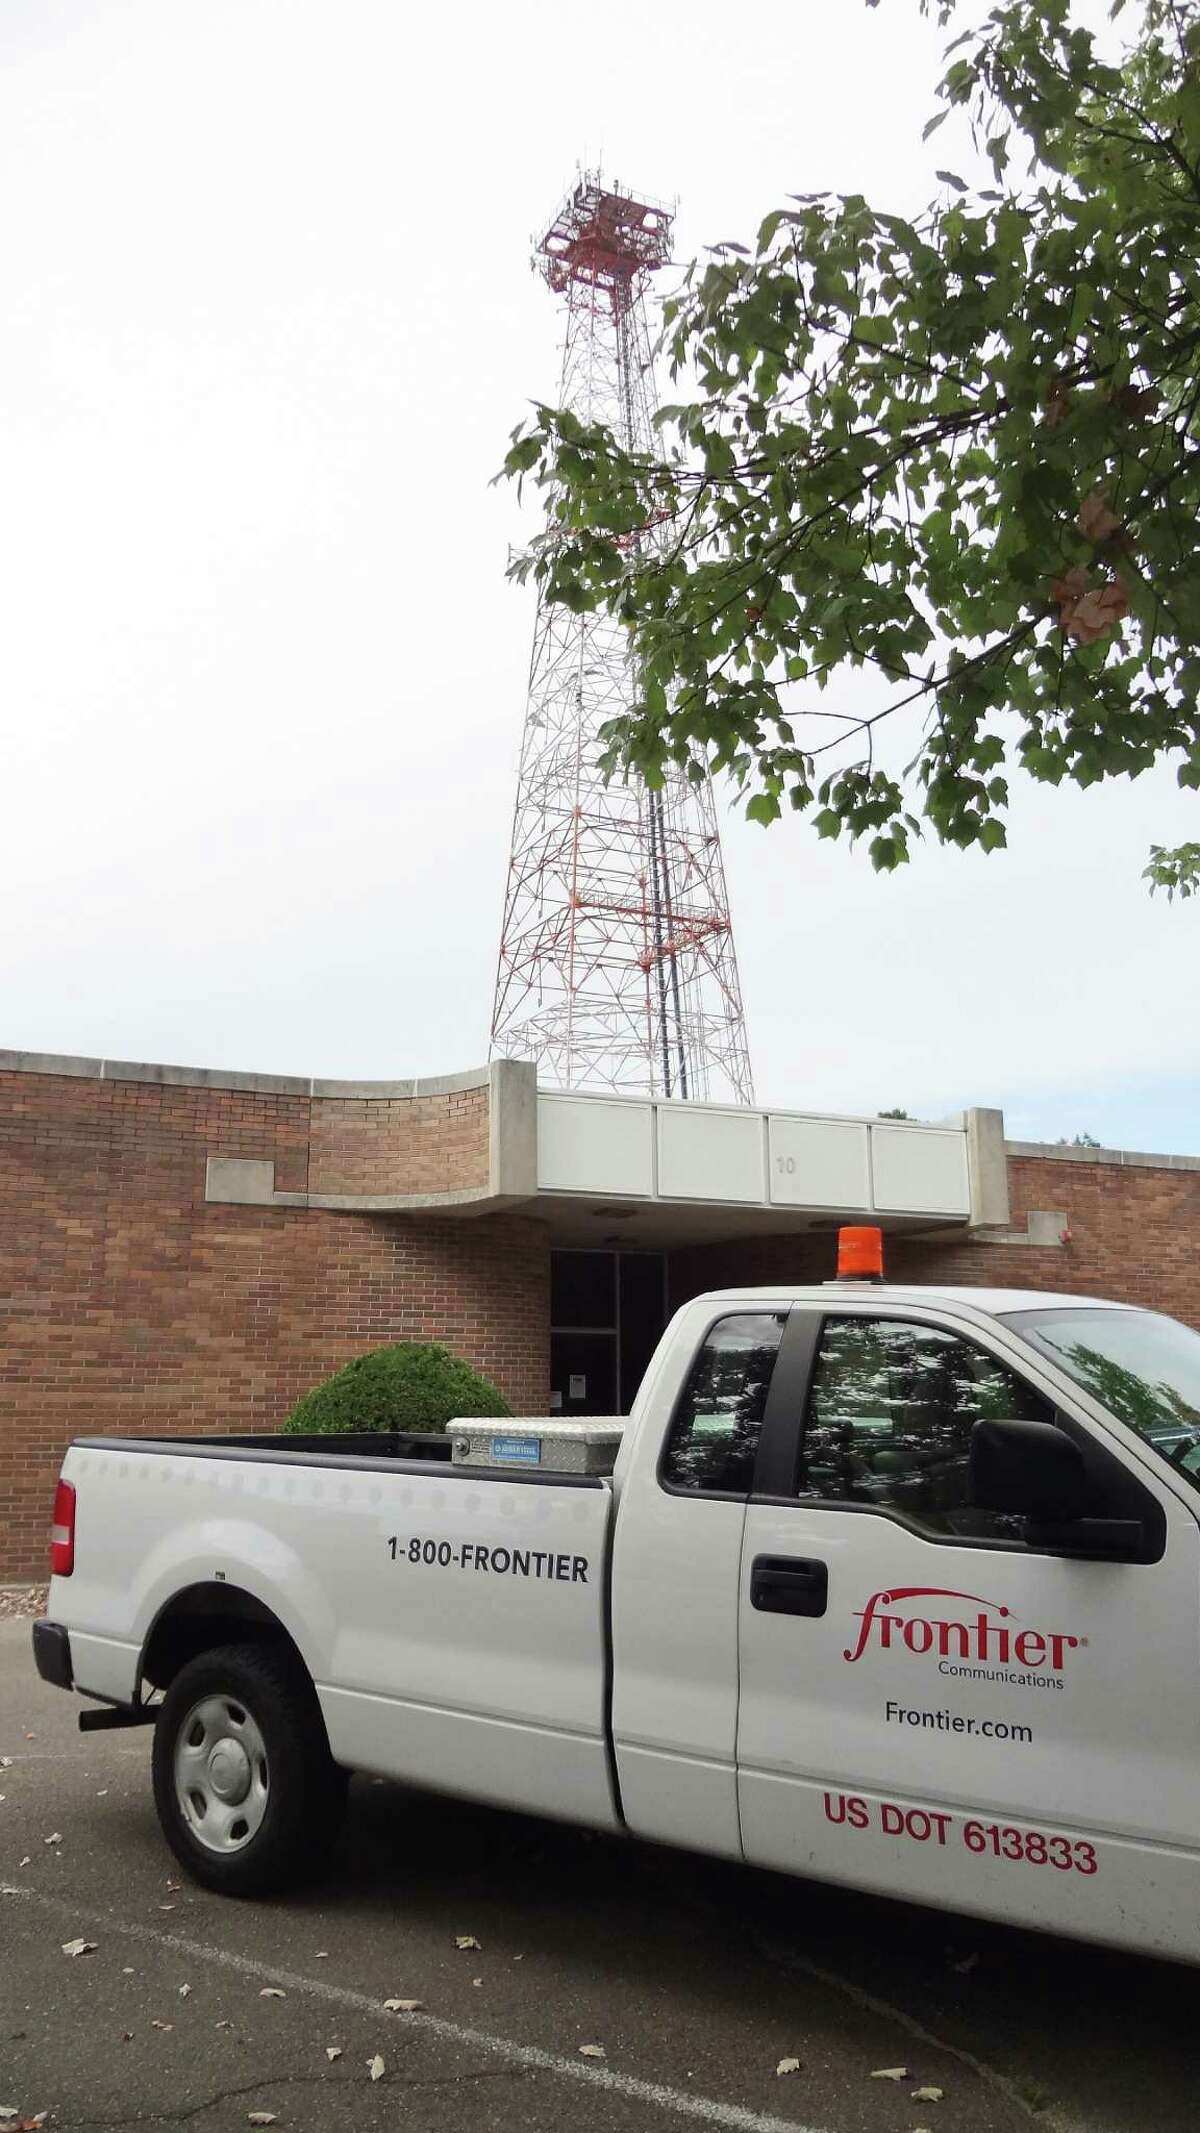 In September 2016, Cushman & Wakefield listed for sale a Frontier Communications vehicle dispatch center and cellular tower located at 10 Willard Rd. in Norwalk, Conn.